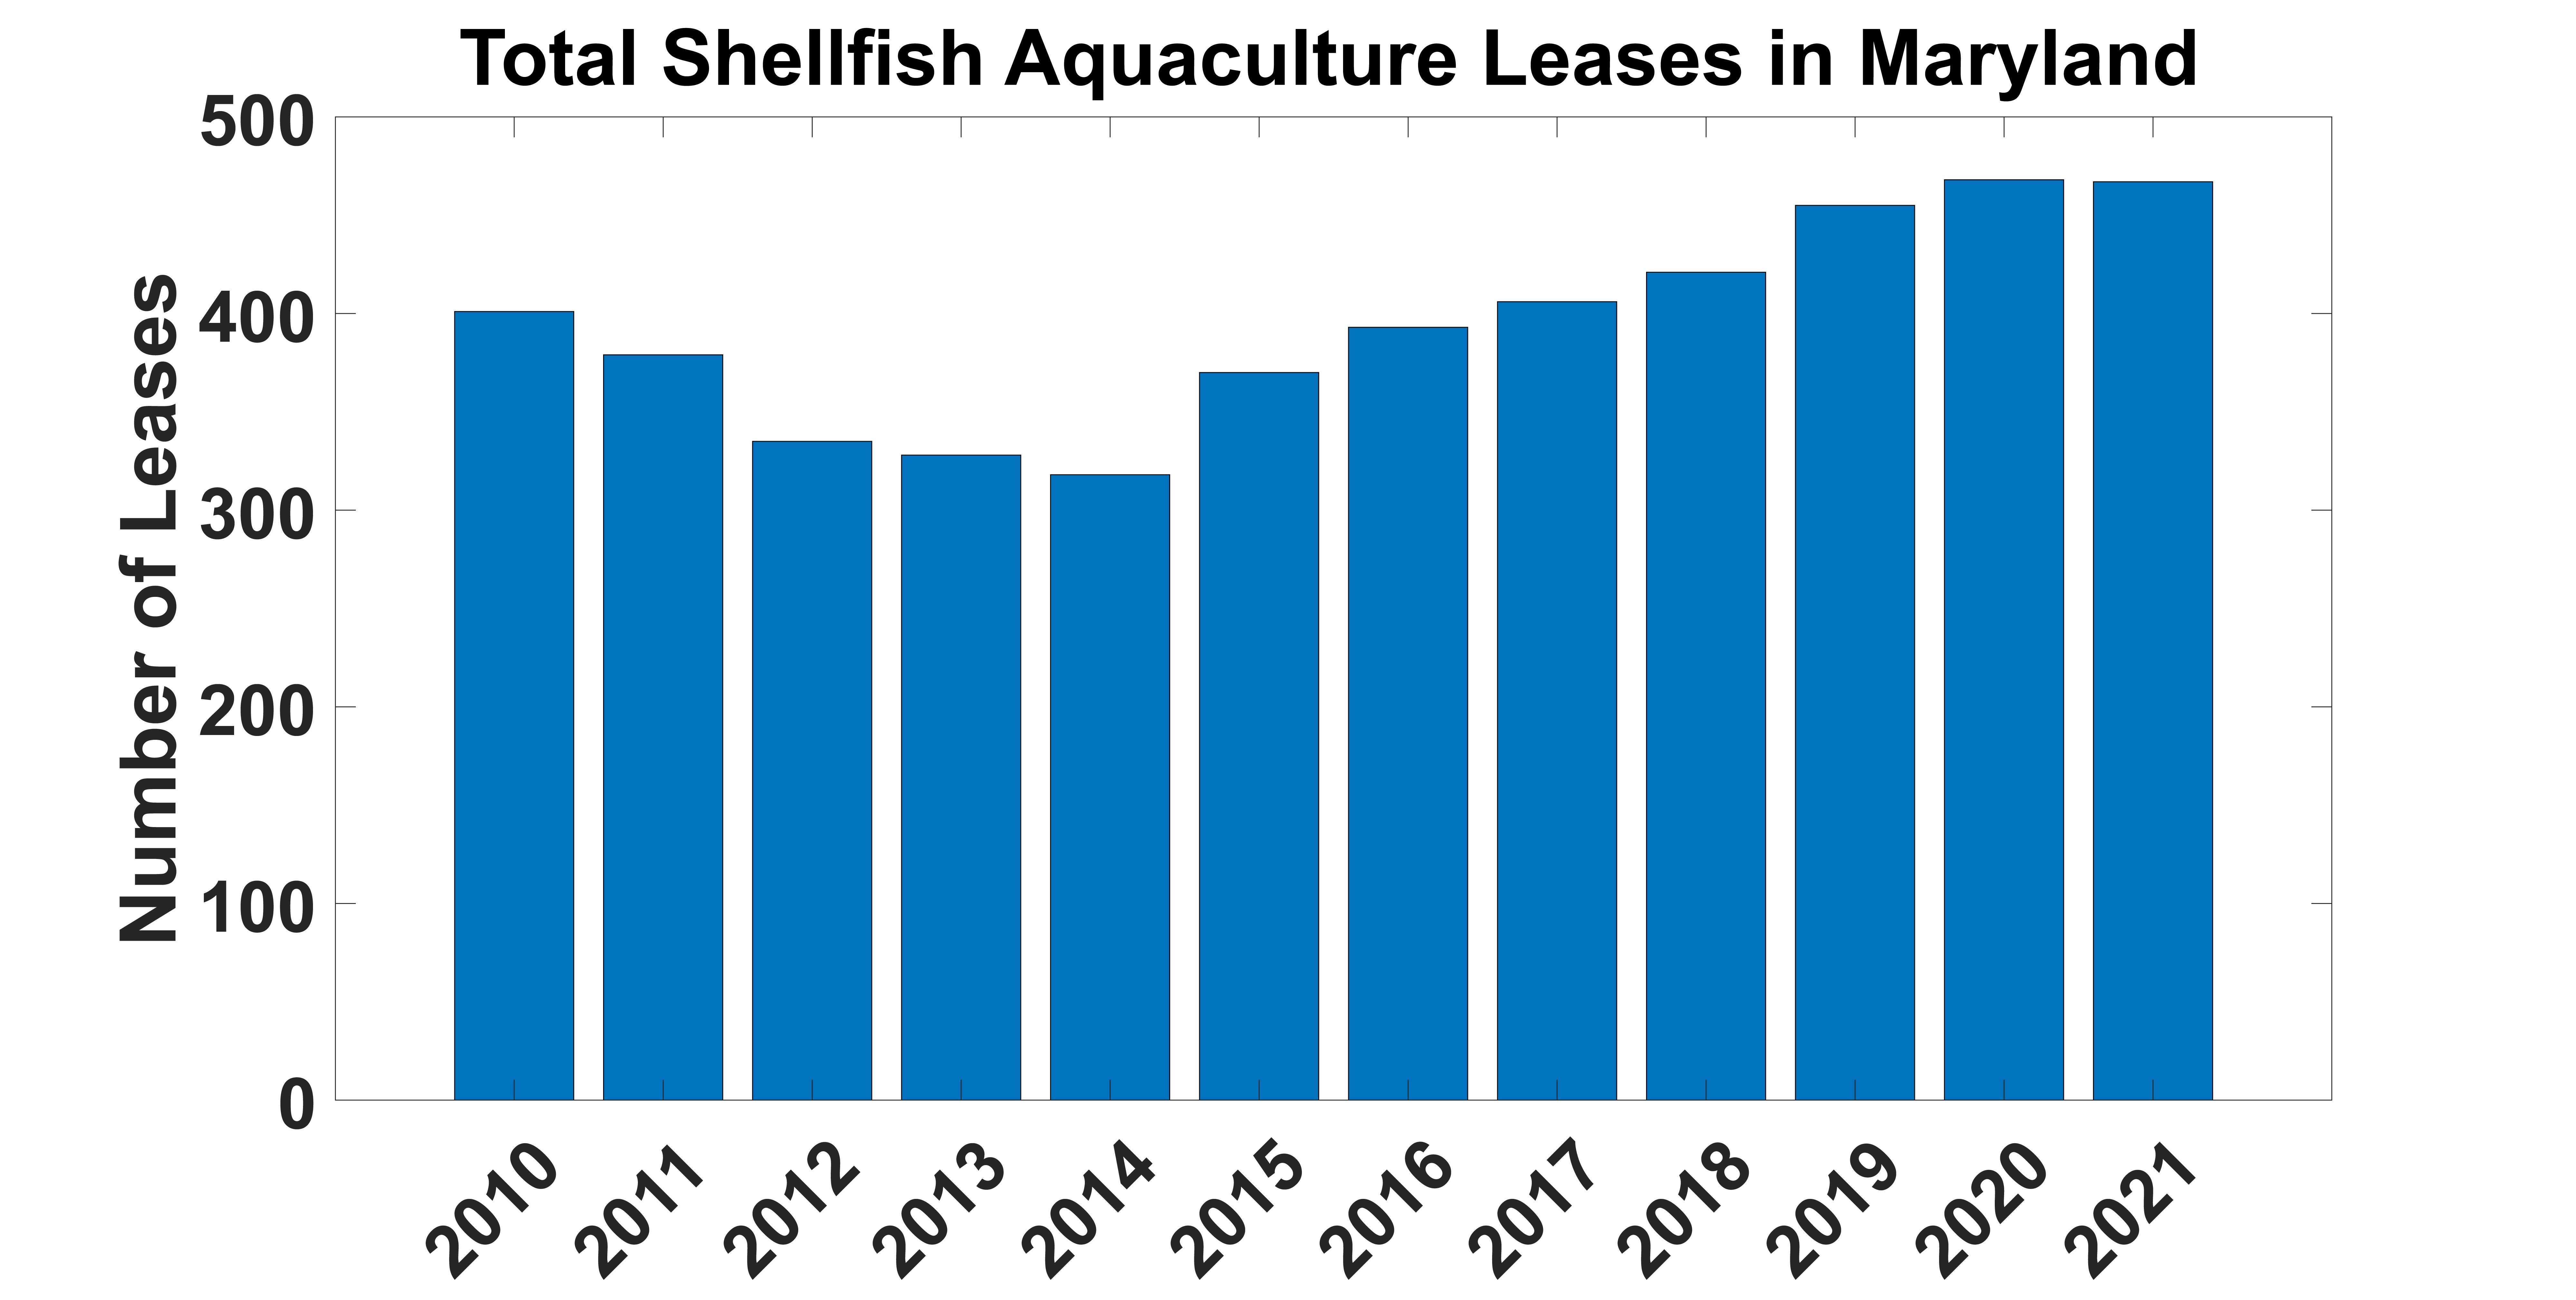 Number of leases for shellfish aquaculture activities in Maryland, 2010-2021 bar graph.